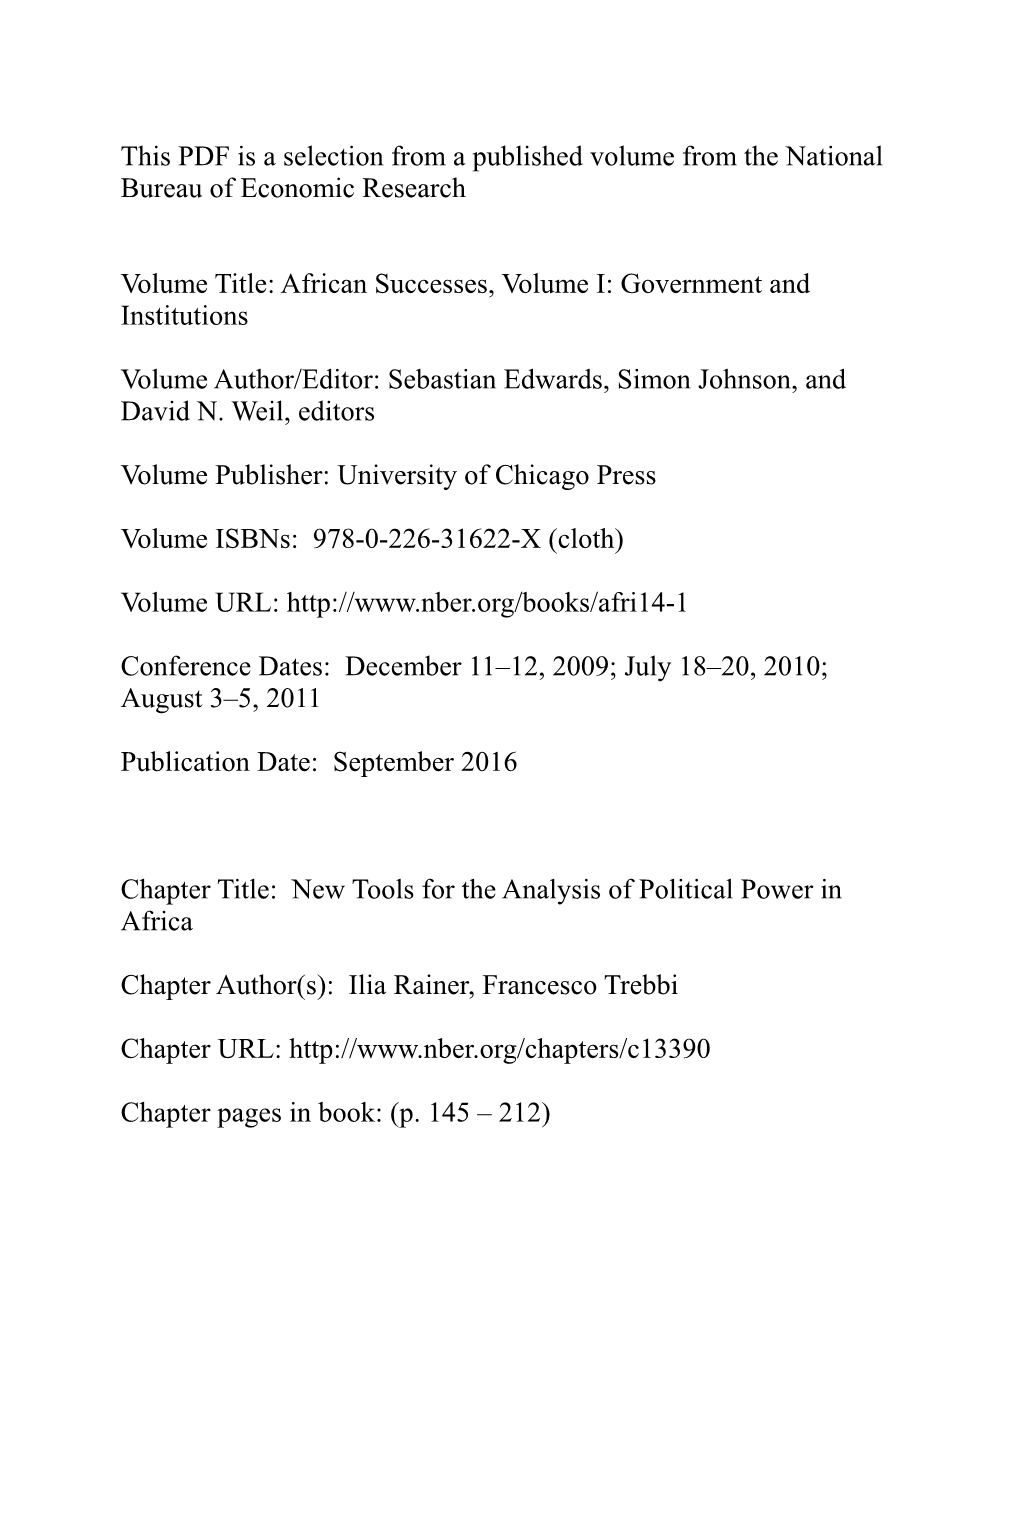 African Successes, Volume I: Government and Institutions